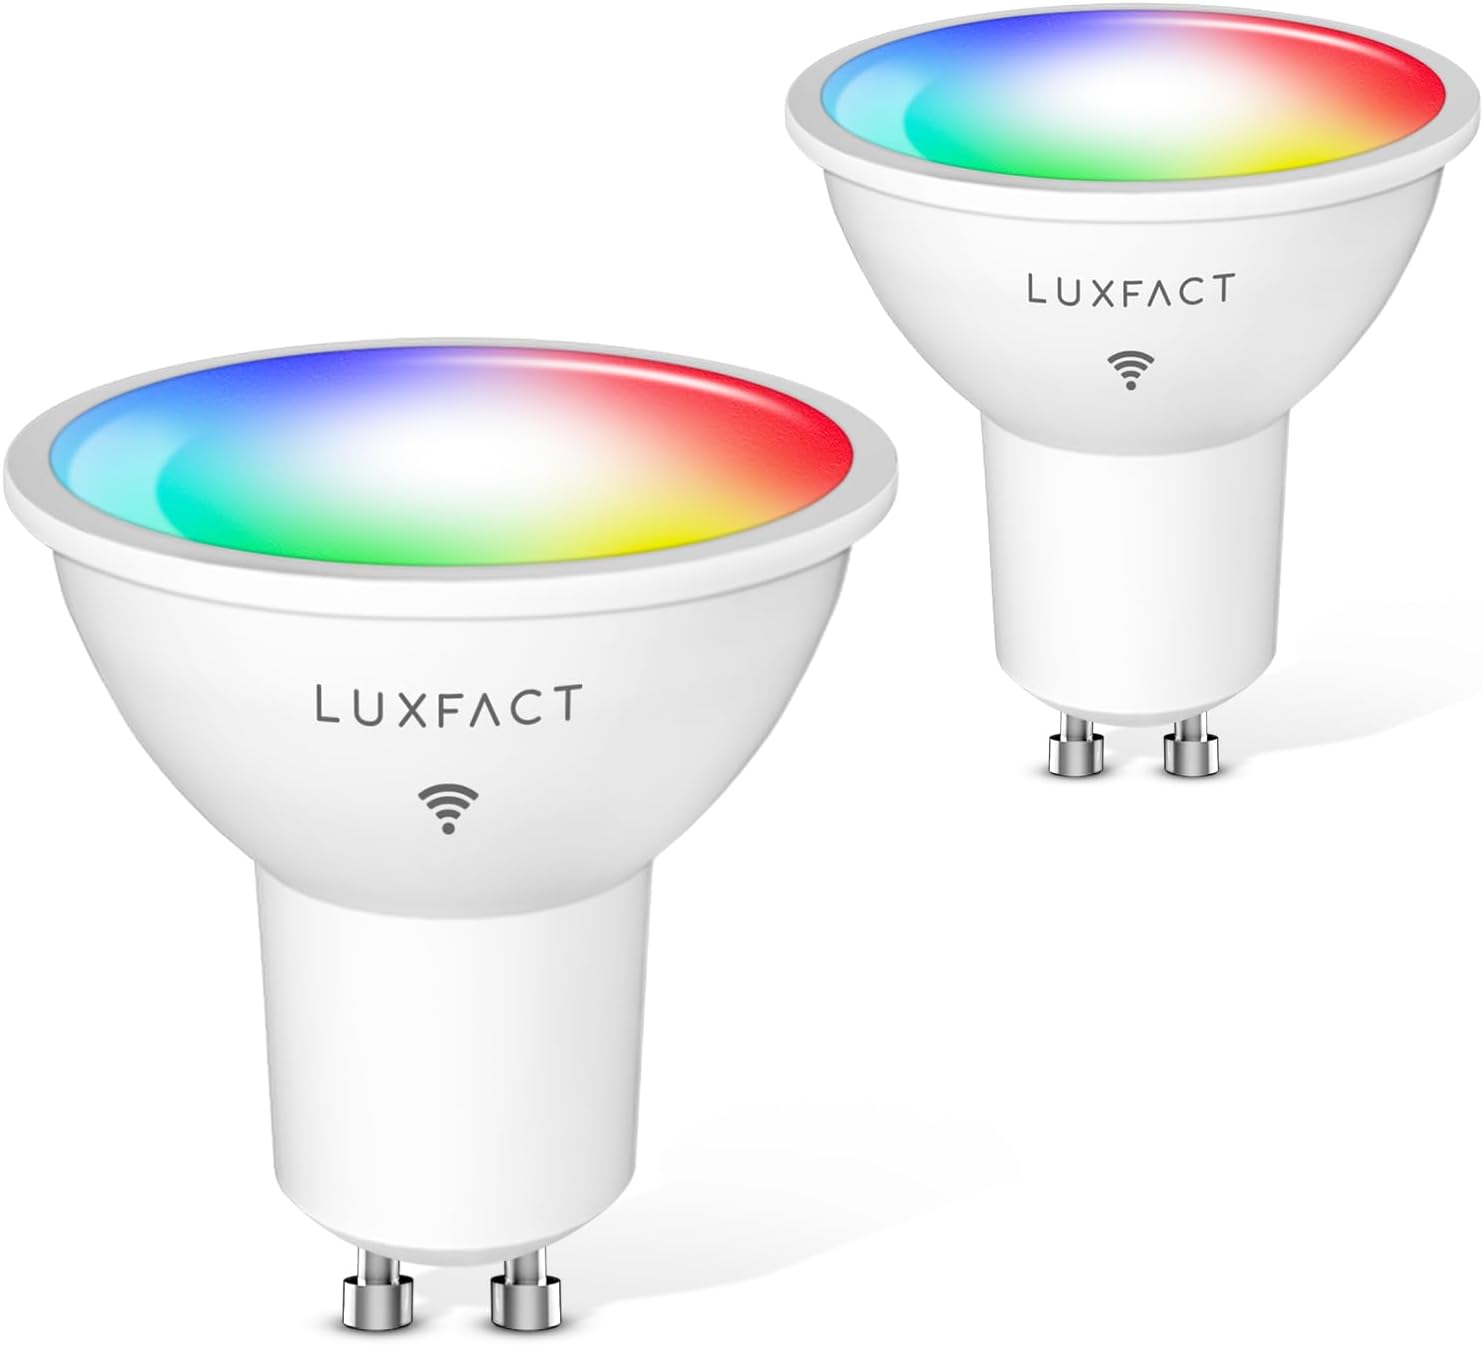 LUXFACT GU10 Smart LED Bulb - 5W (50W Equivalent) RGBCW Color Changing Bulb - Compatible with Alexa Google Assistant – 450LM - Multicolor Music Sync GU10 LED Bulb 2 Pack